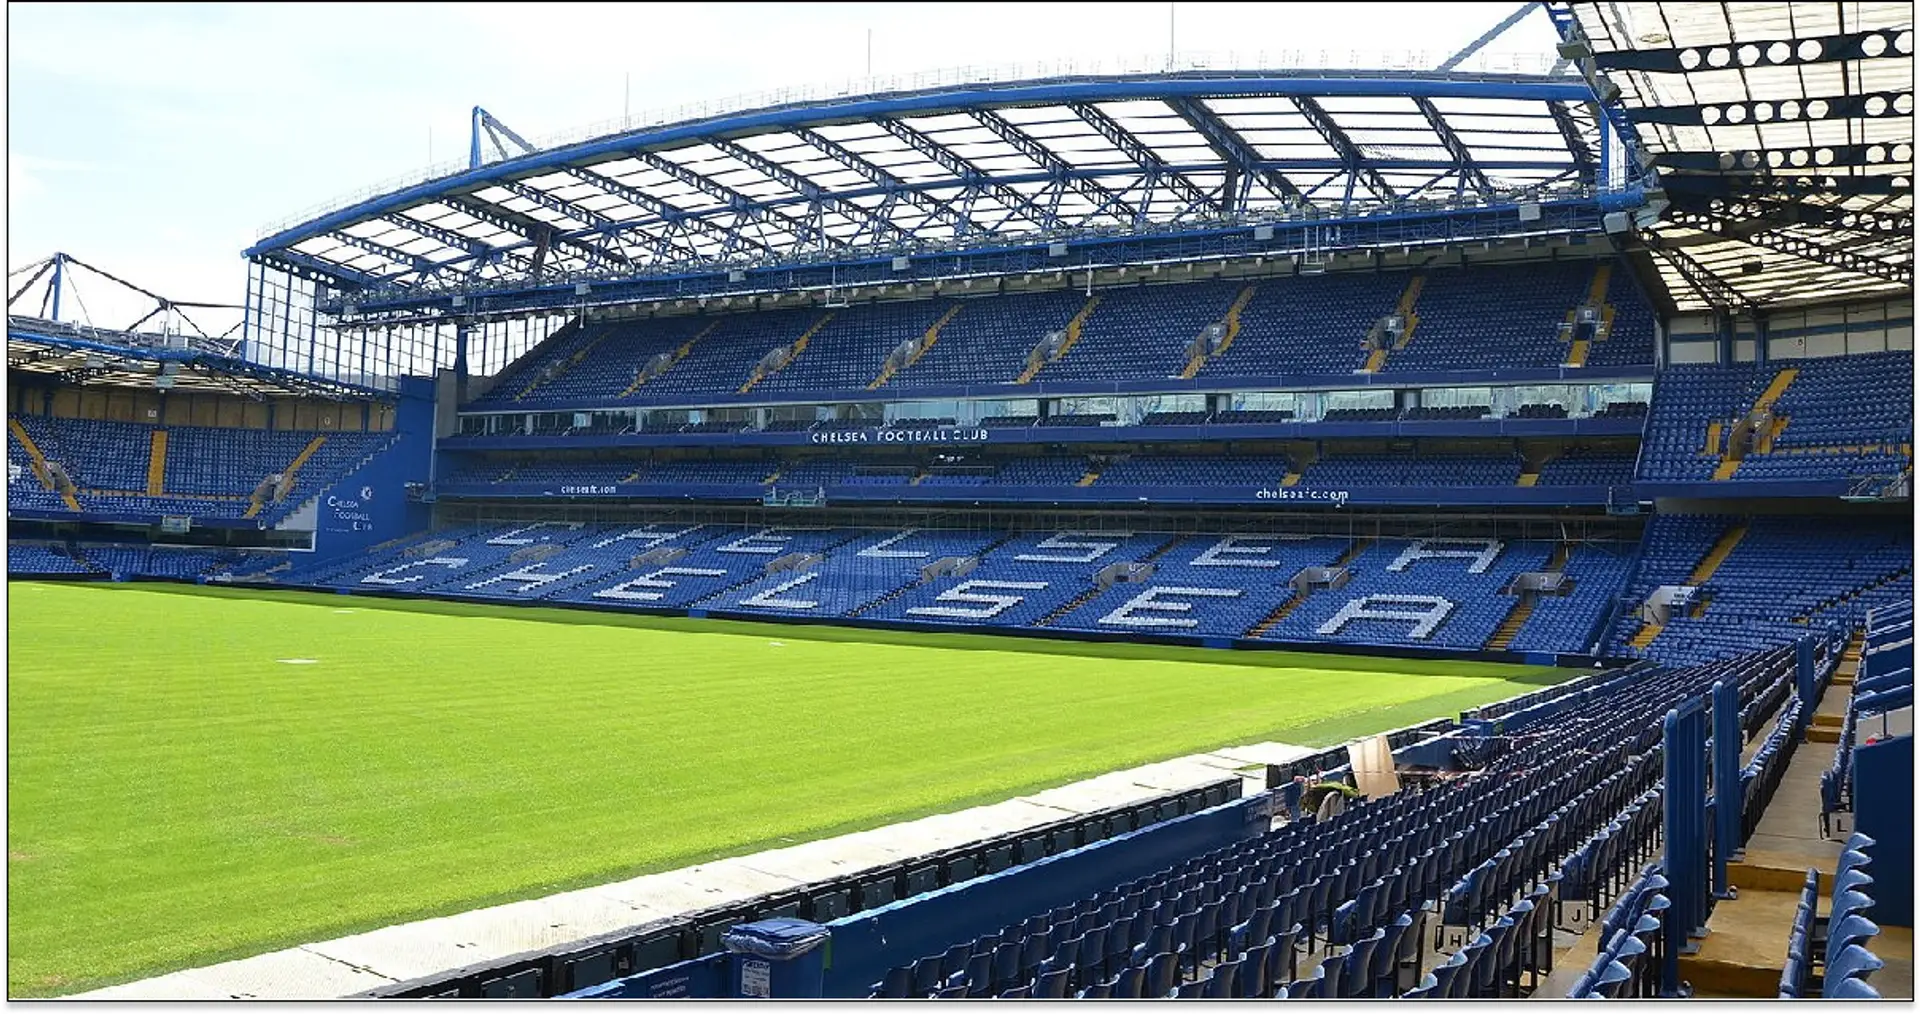 'We are in middle of London, that's good news and bad news': Boehly updates on Chelsea stadium plans